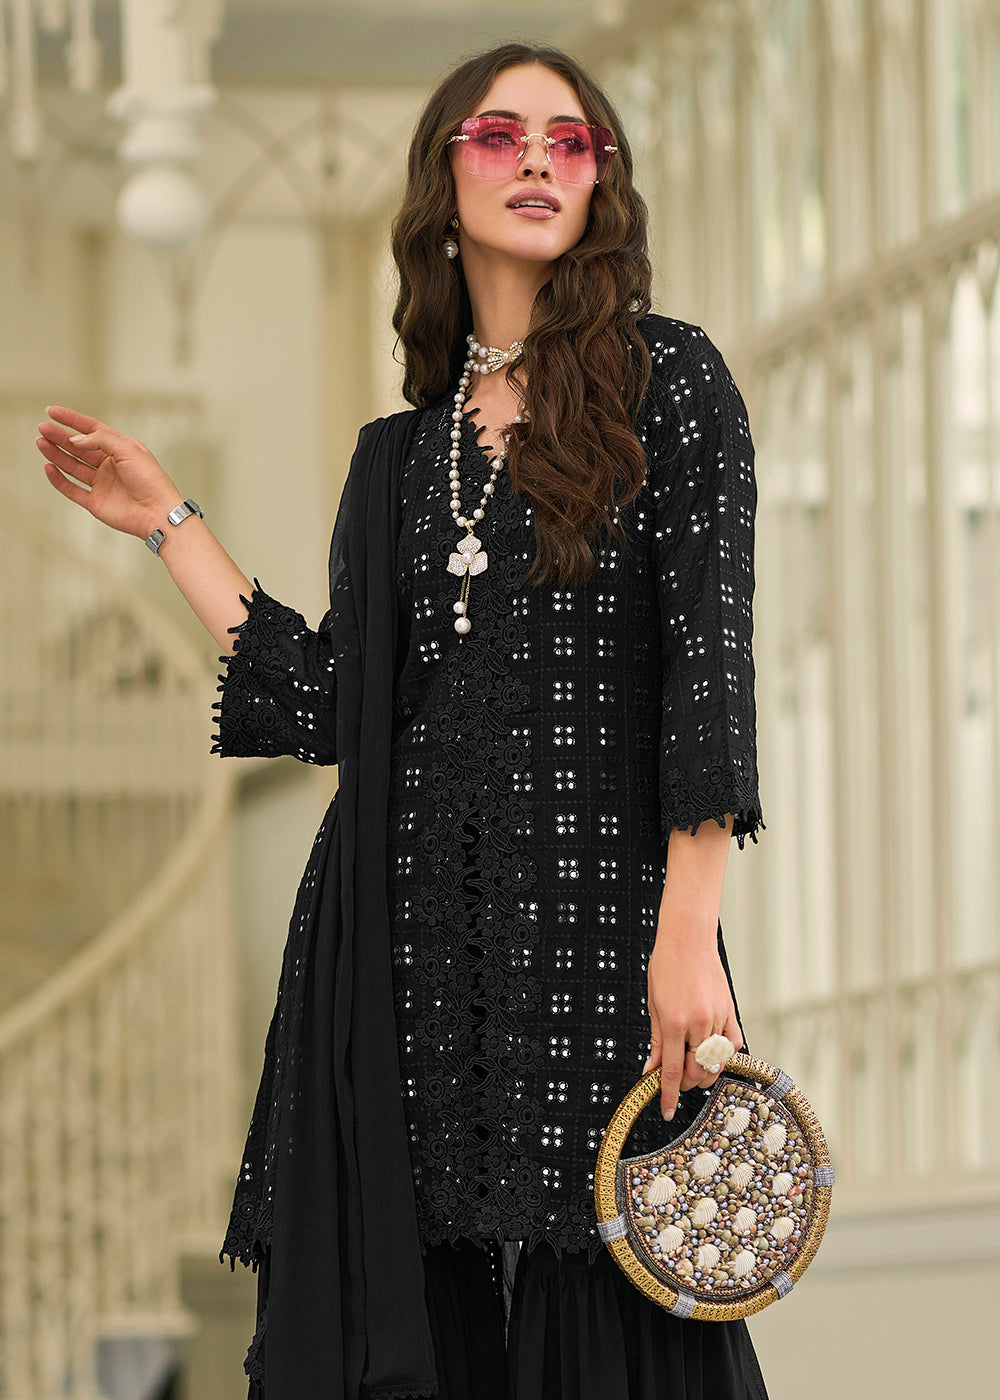 Shop Now Pleasing Black Fancy Embroidered Festive Gharara Suit Online at Empress Clothing in USA, UK, Canada, Italy & Worldwide. 